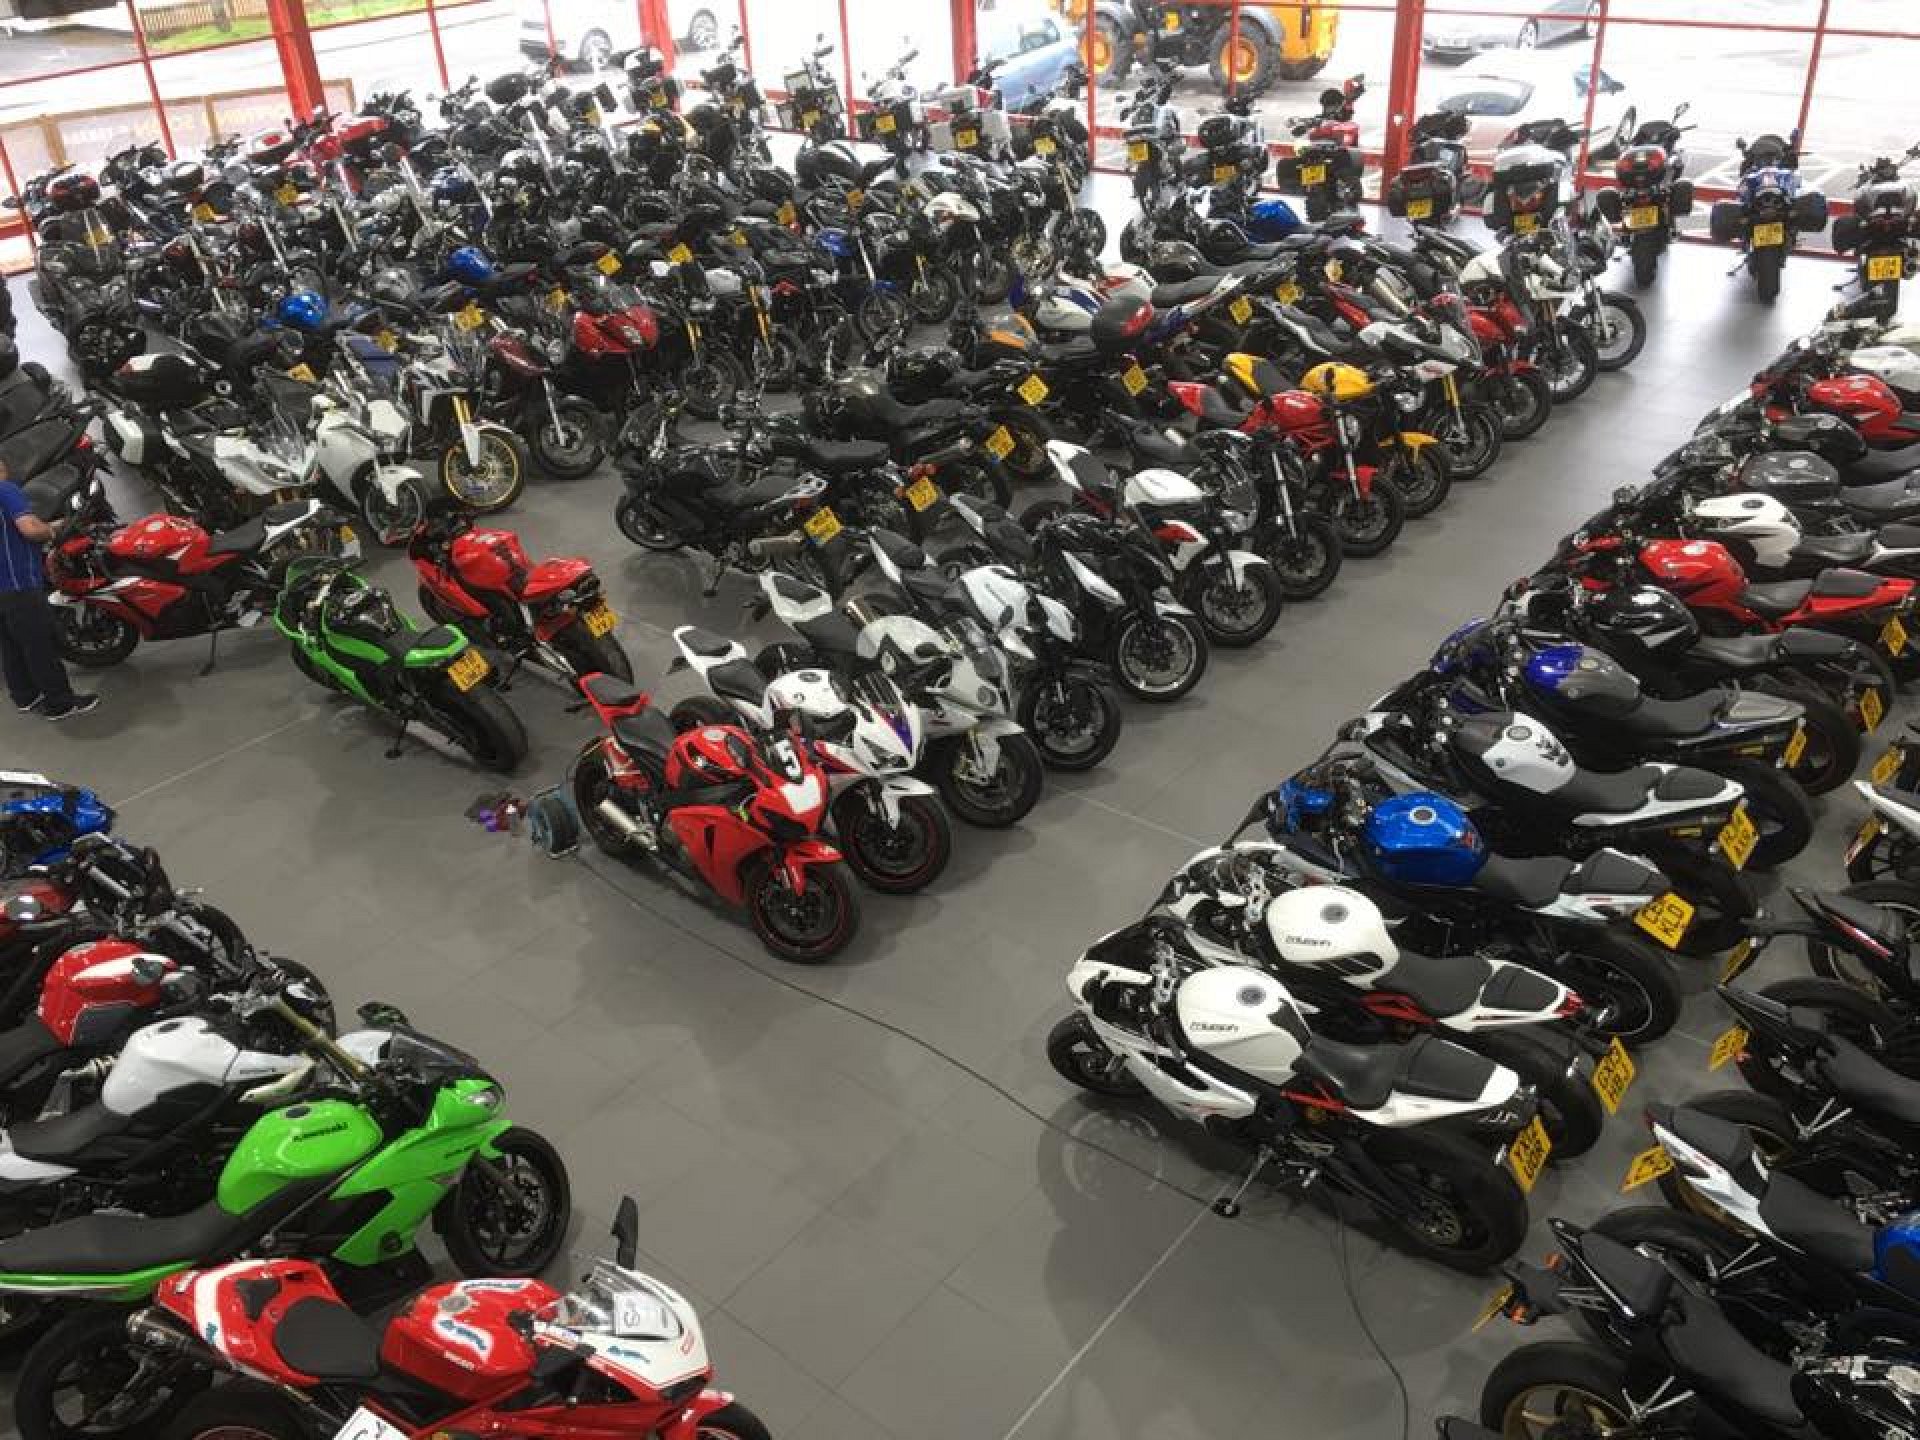 When buying a new or used motorcycle research for the best insurance policy.